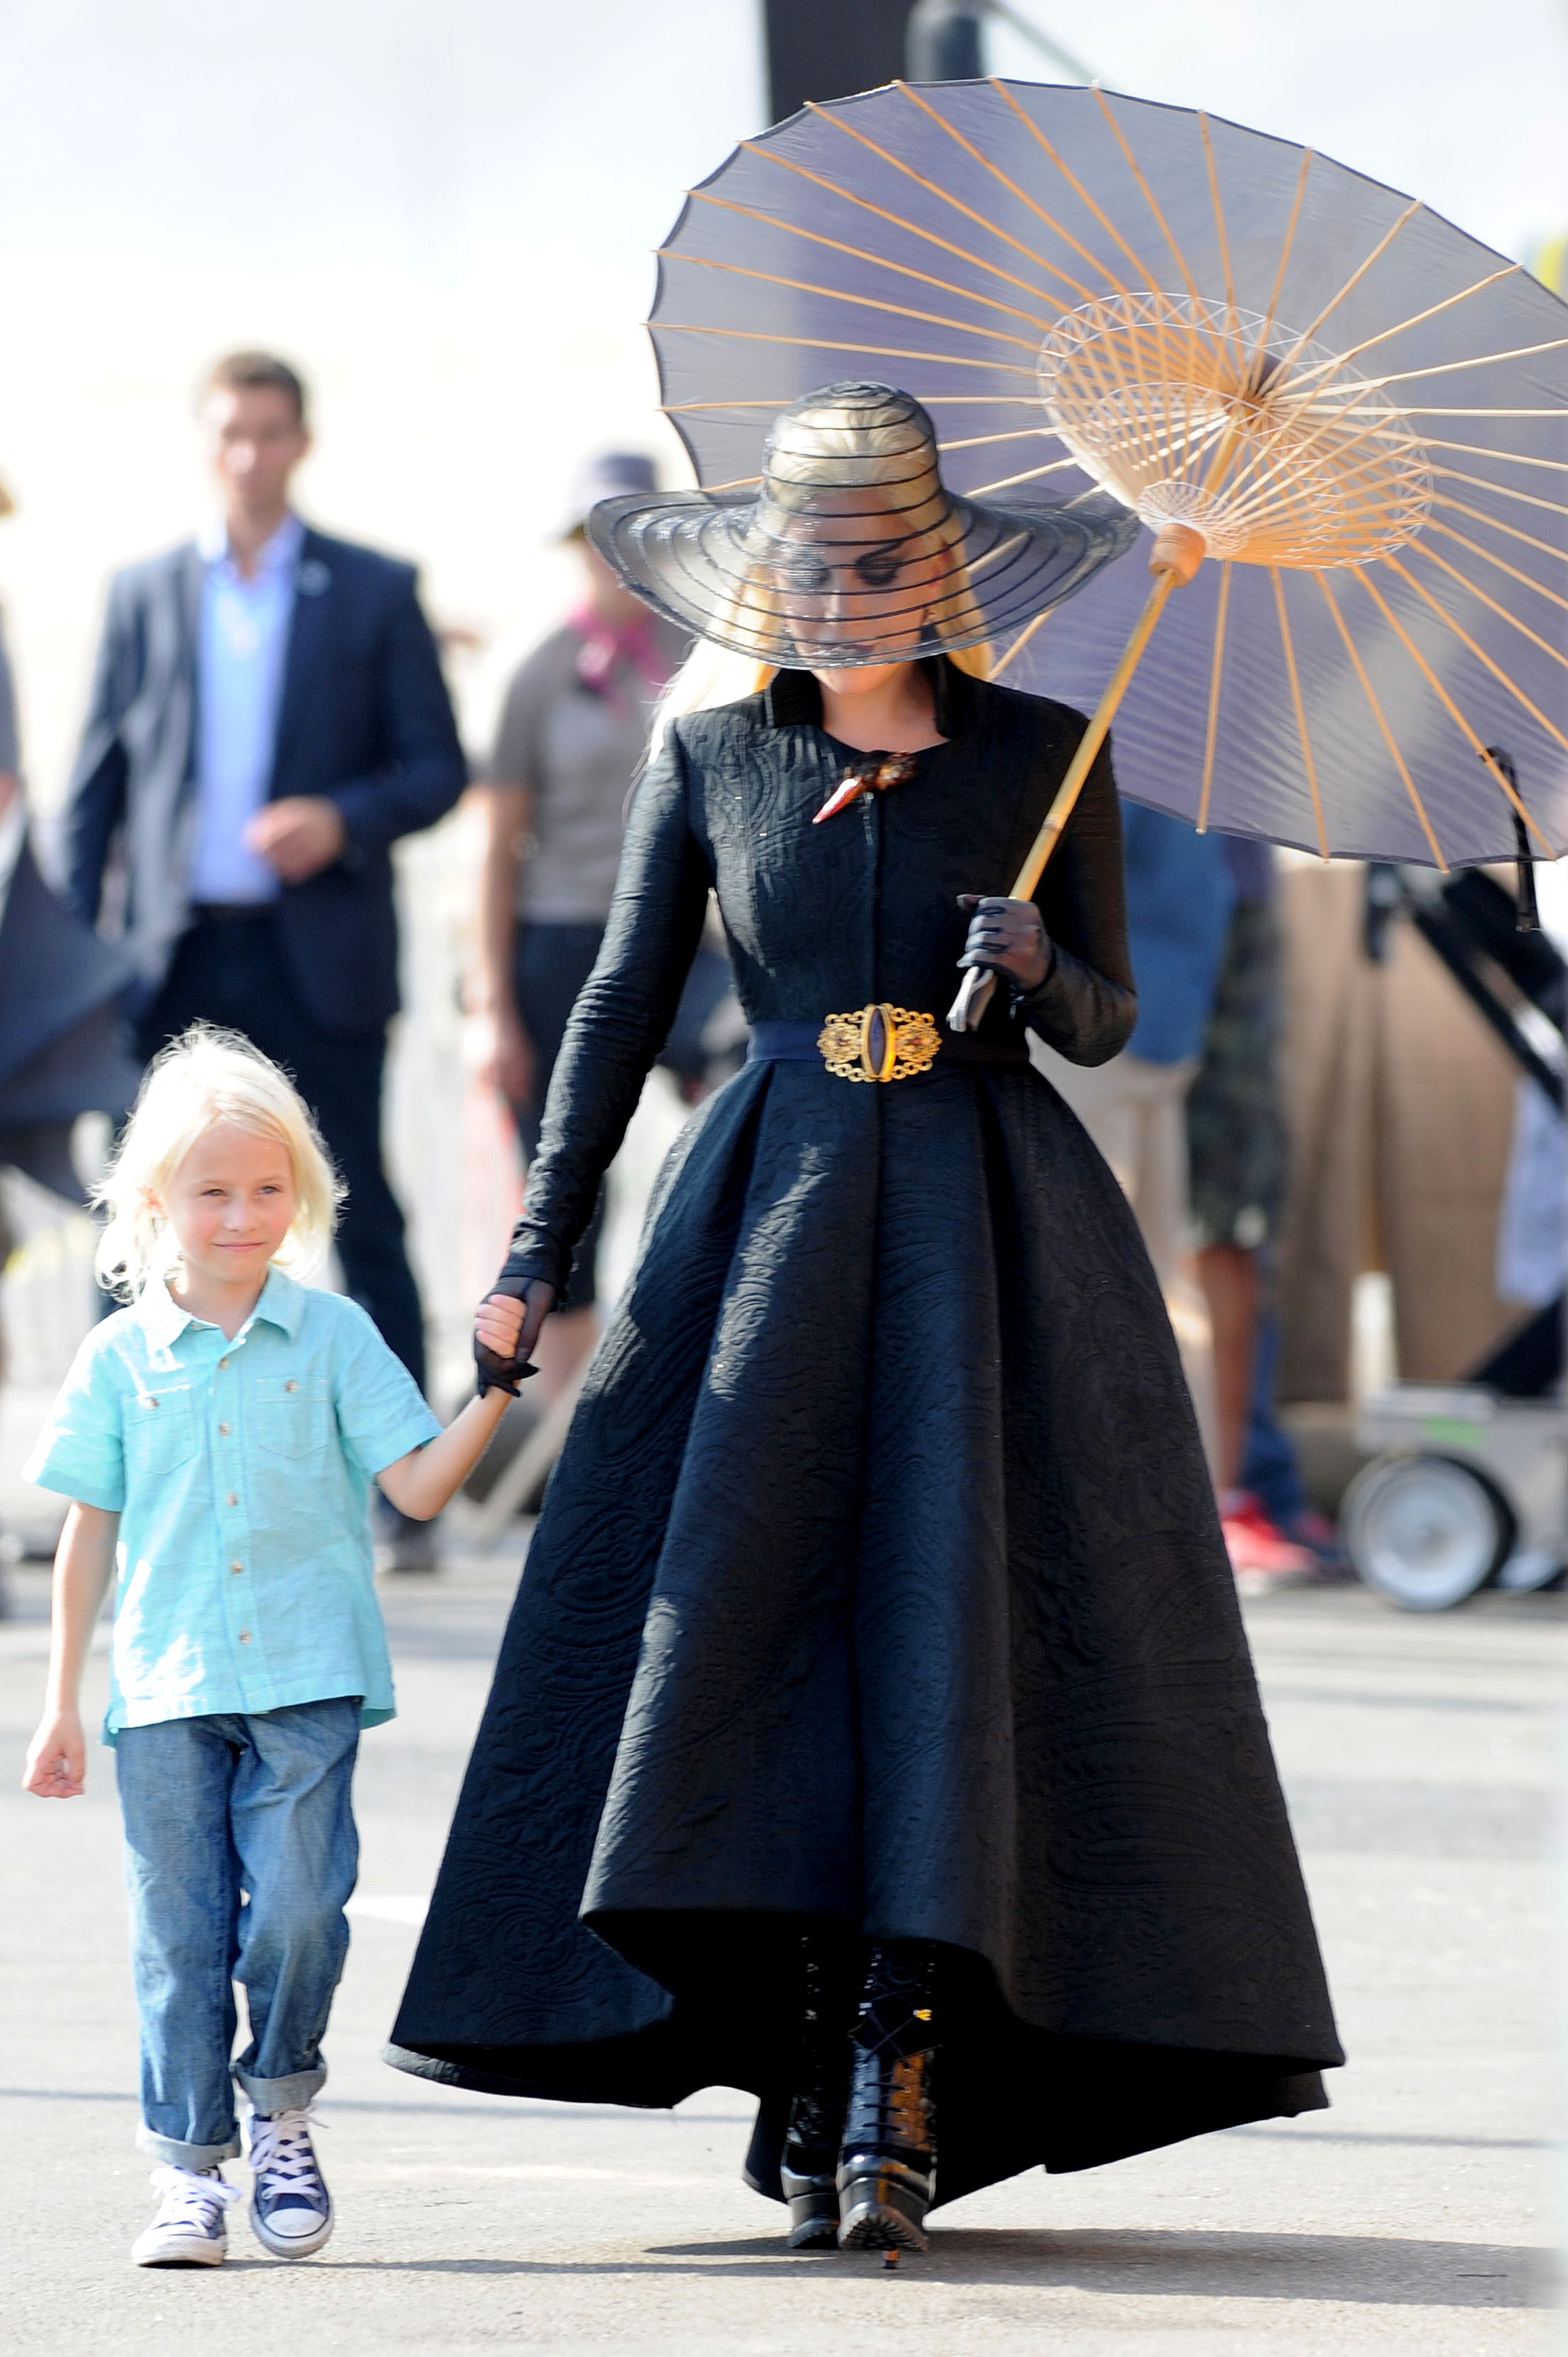 Lennon Henry and Lady Gaga on location for AHS:Hotel